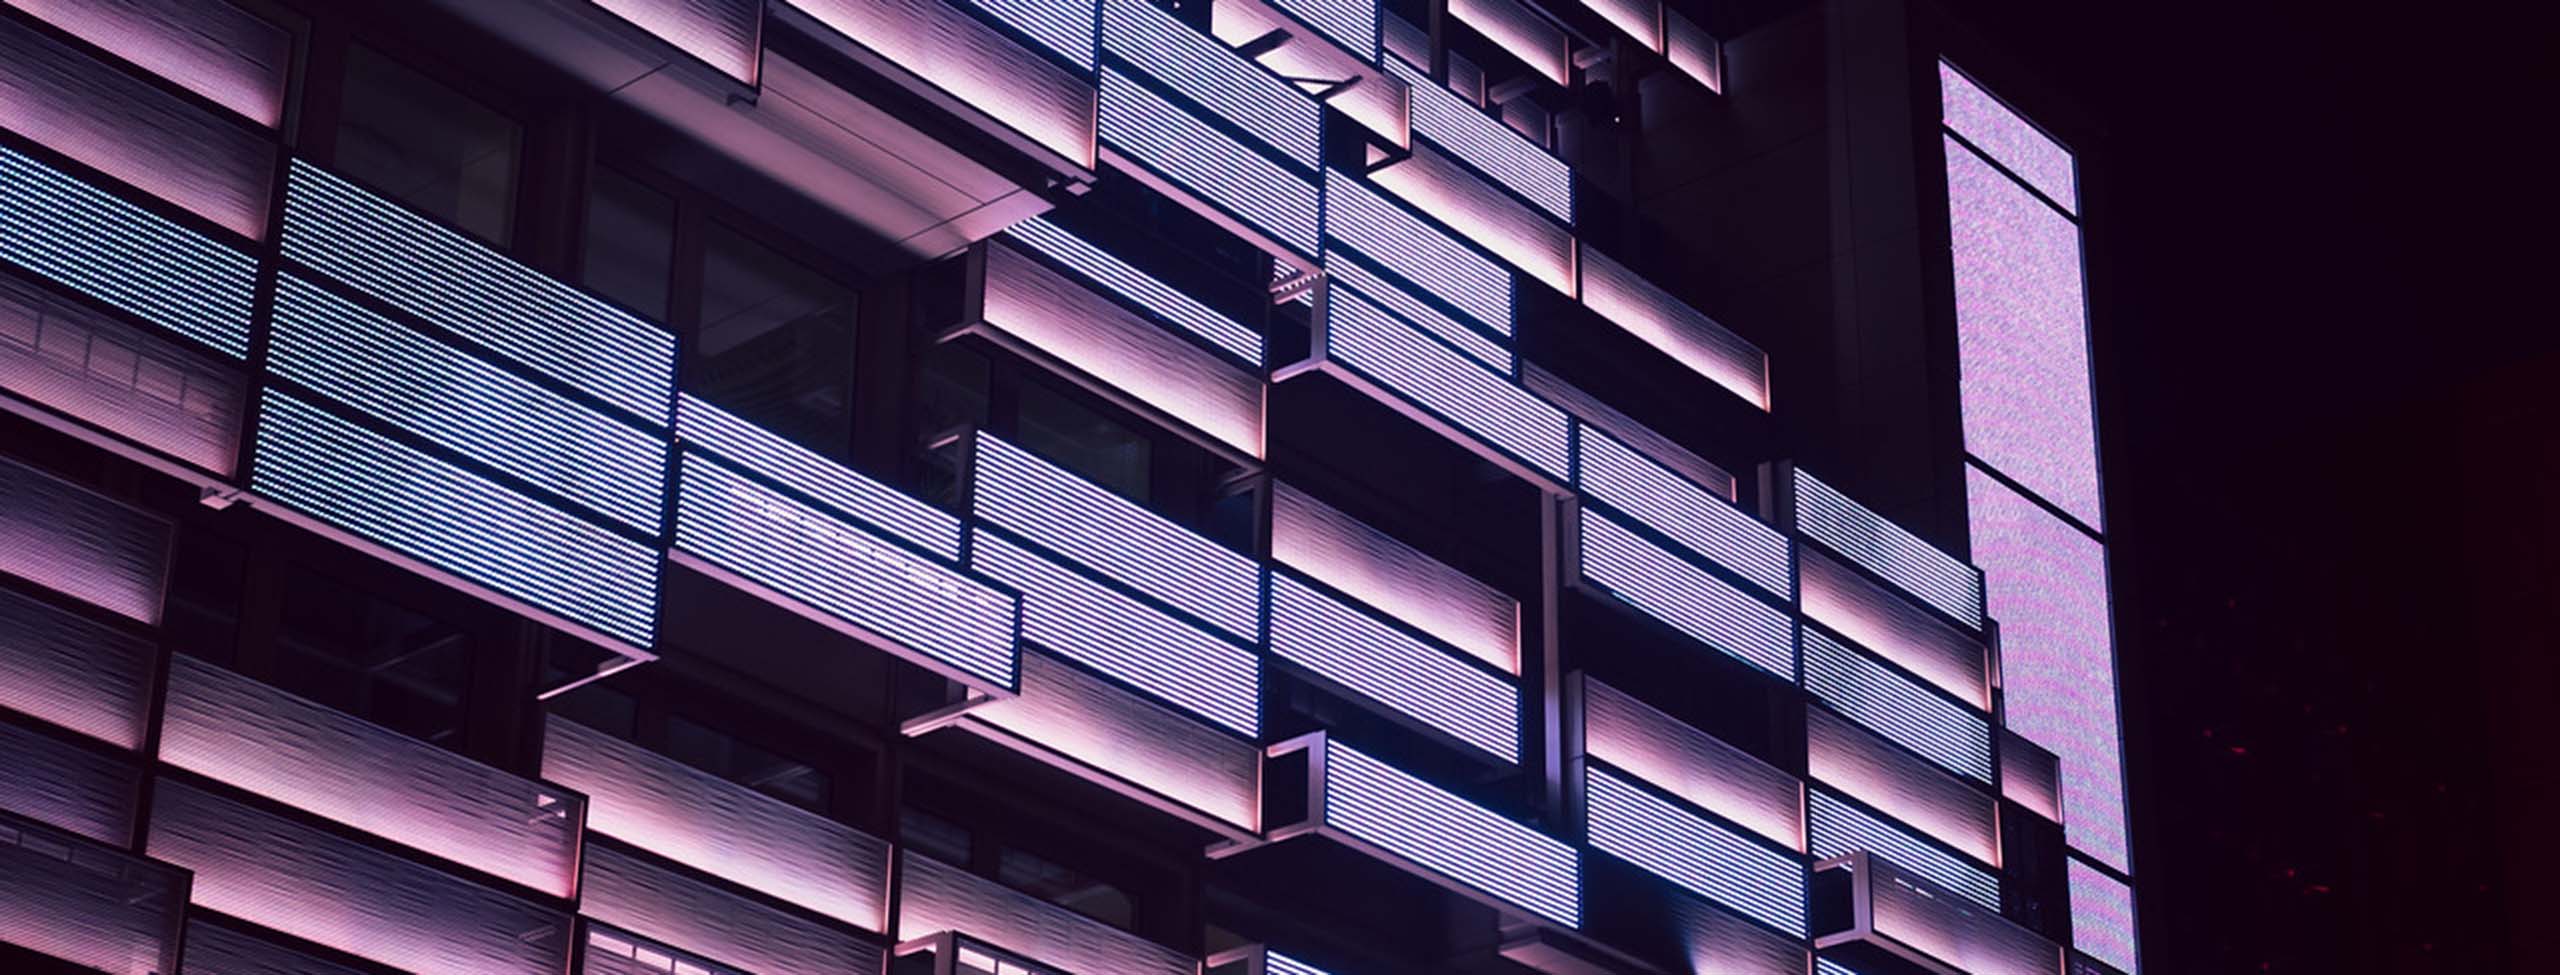 purple abstract building